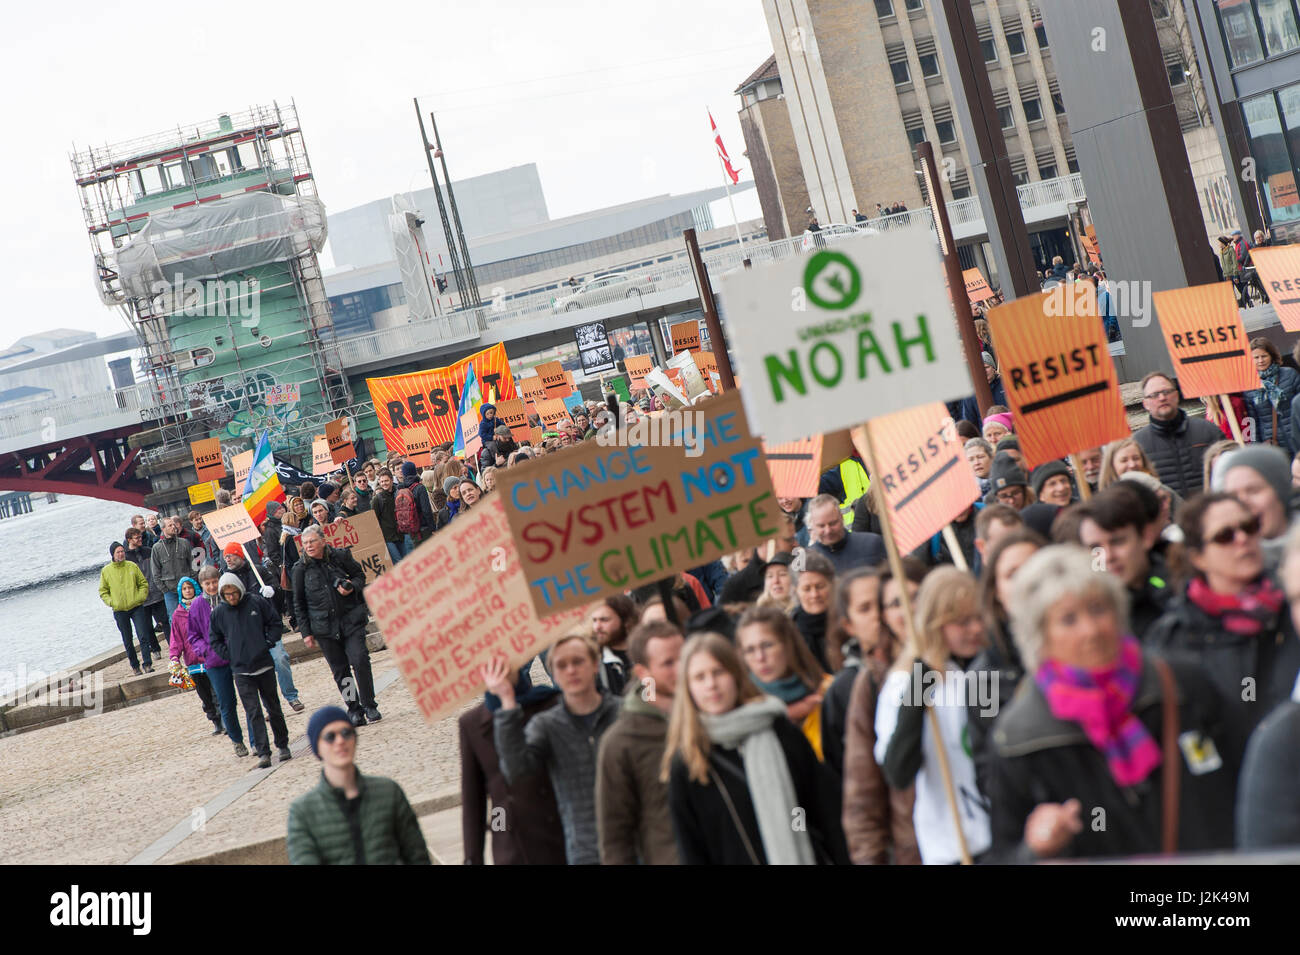 Copenhagen, Denmark, Saturday 29th April, 2017 More than 1700 people join a climate change march in the Danish city of Copenhagen on Saturday. The march coincides with US President Donald Trump's first 100 days in office, and is part of a larger initiative happening in the United States under the title Climate March. The event in Denmark has been organised by a group calling themselves Folkets Klimamarch København (English: The People's Climate March Copenhagen) Credit: Matthew James Harrison/Alamy Live News Stock Photo